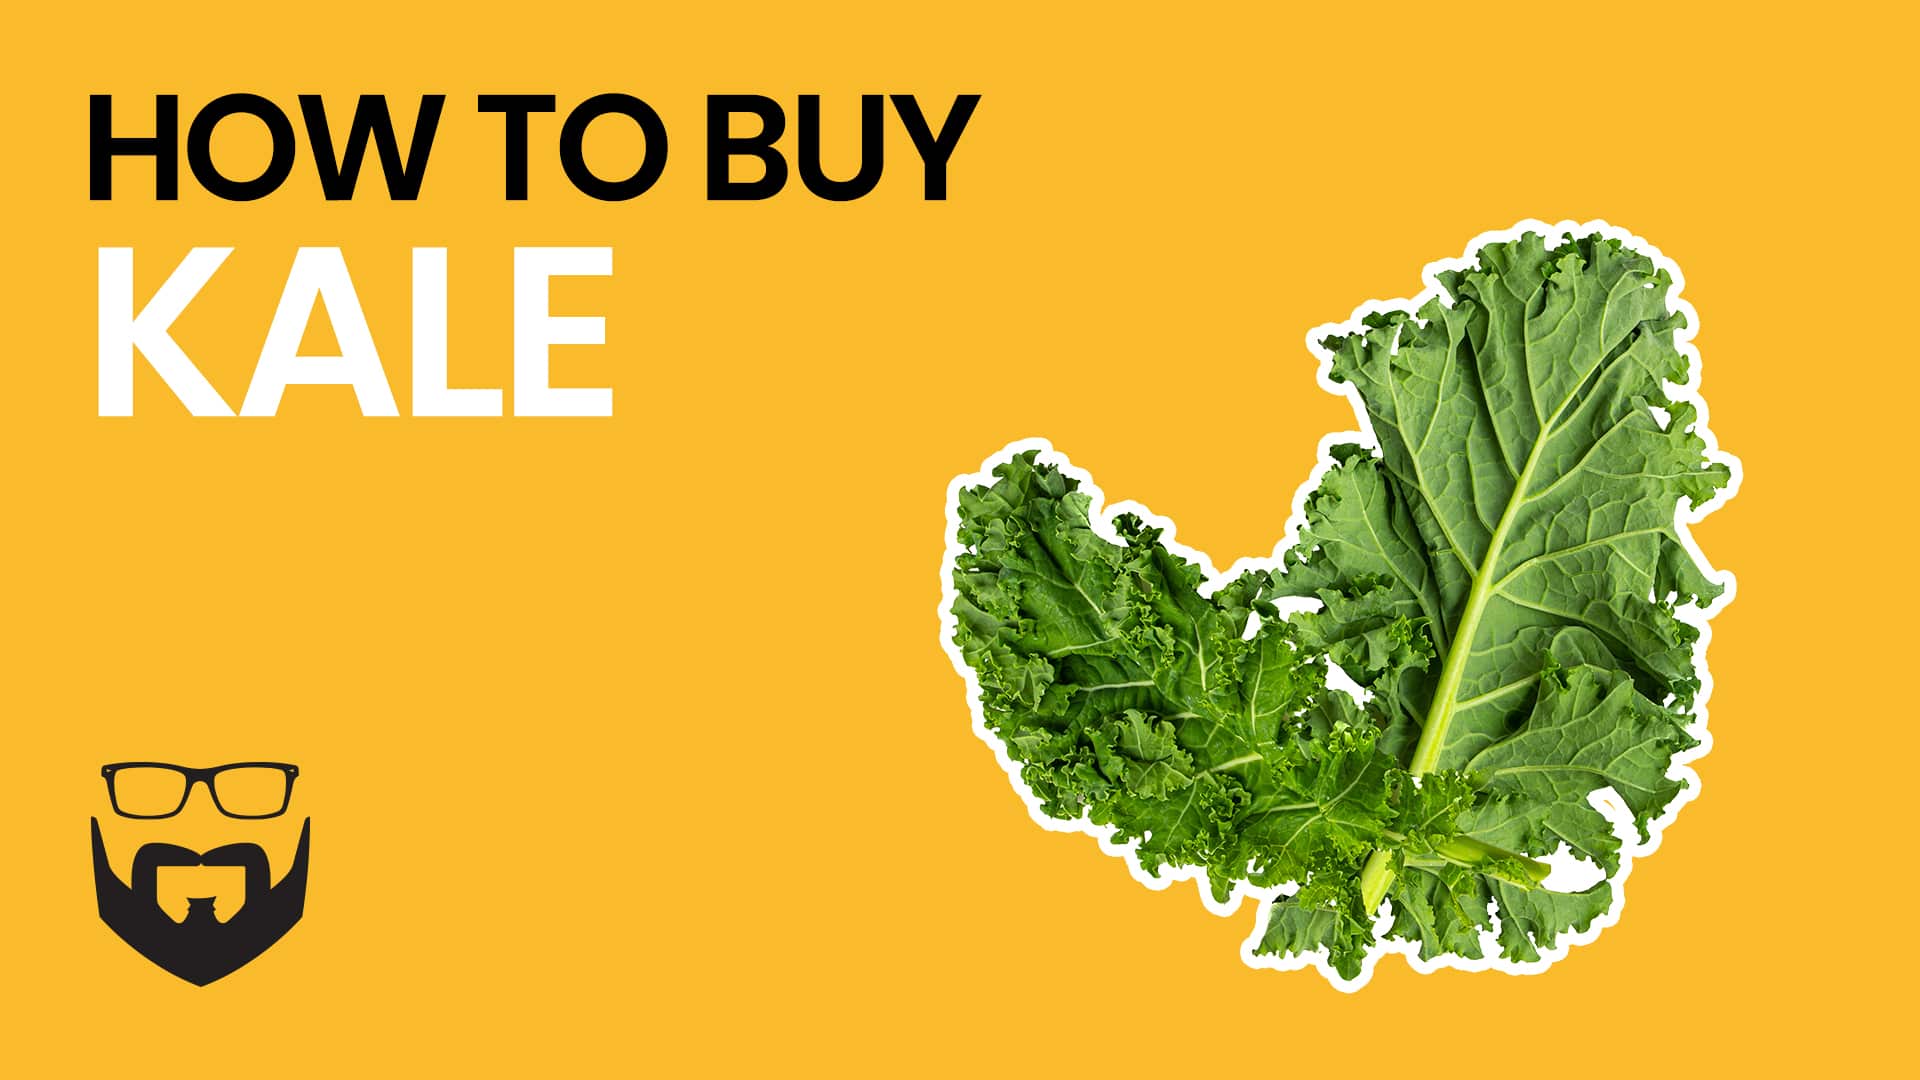 How to Buy Kale Video - Yellow